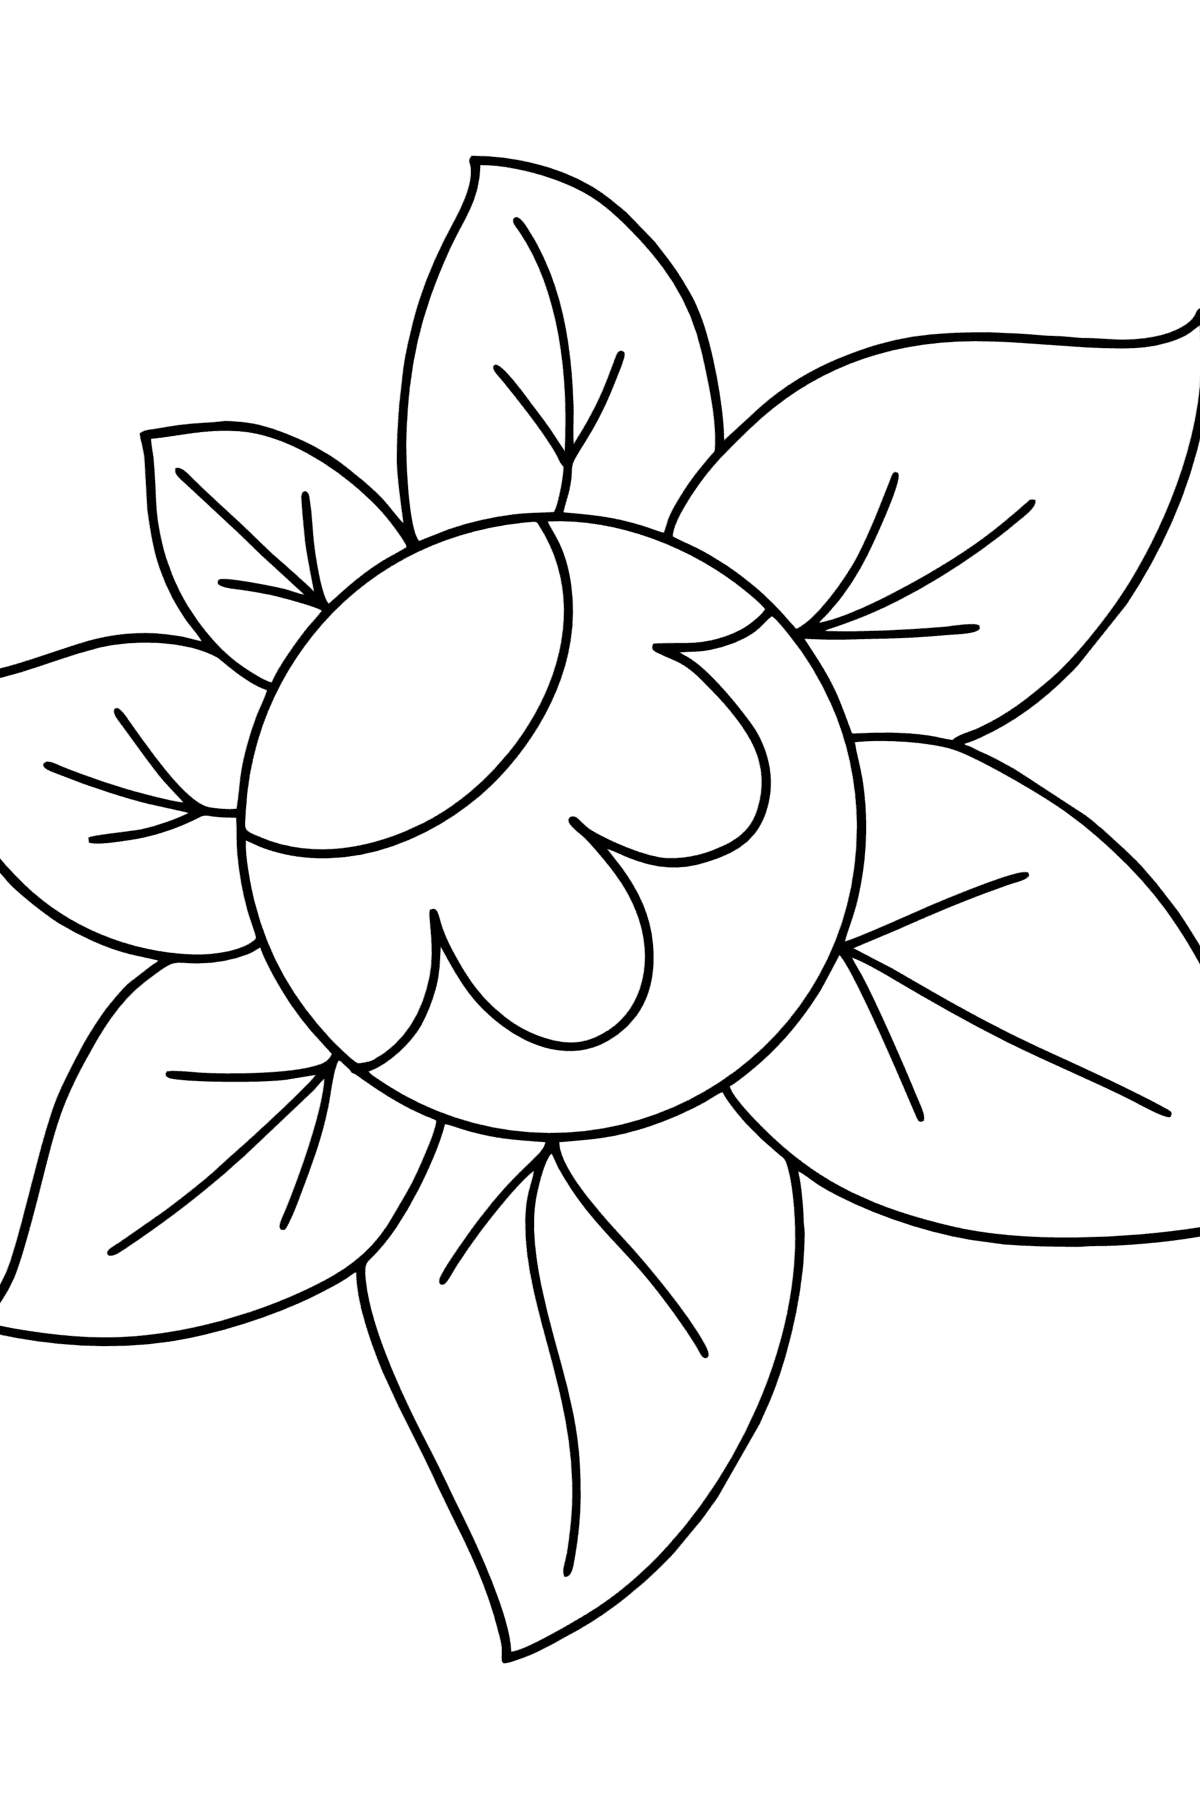 Zentangle Art flower coloring page - Coloring Pages for Kids